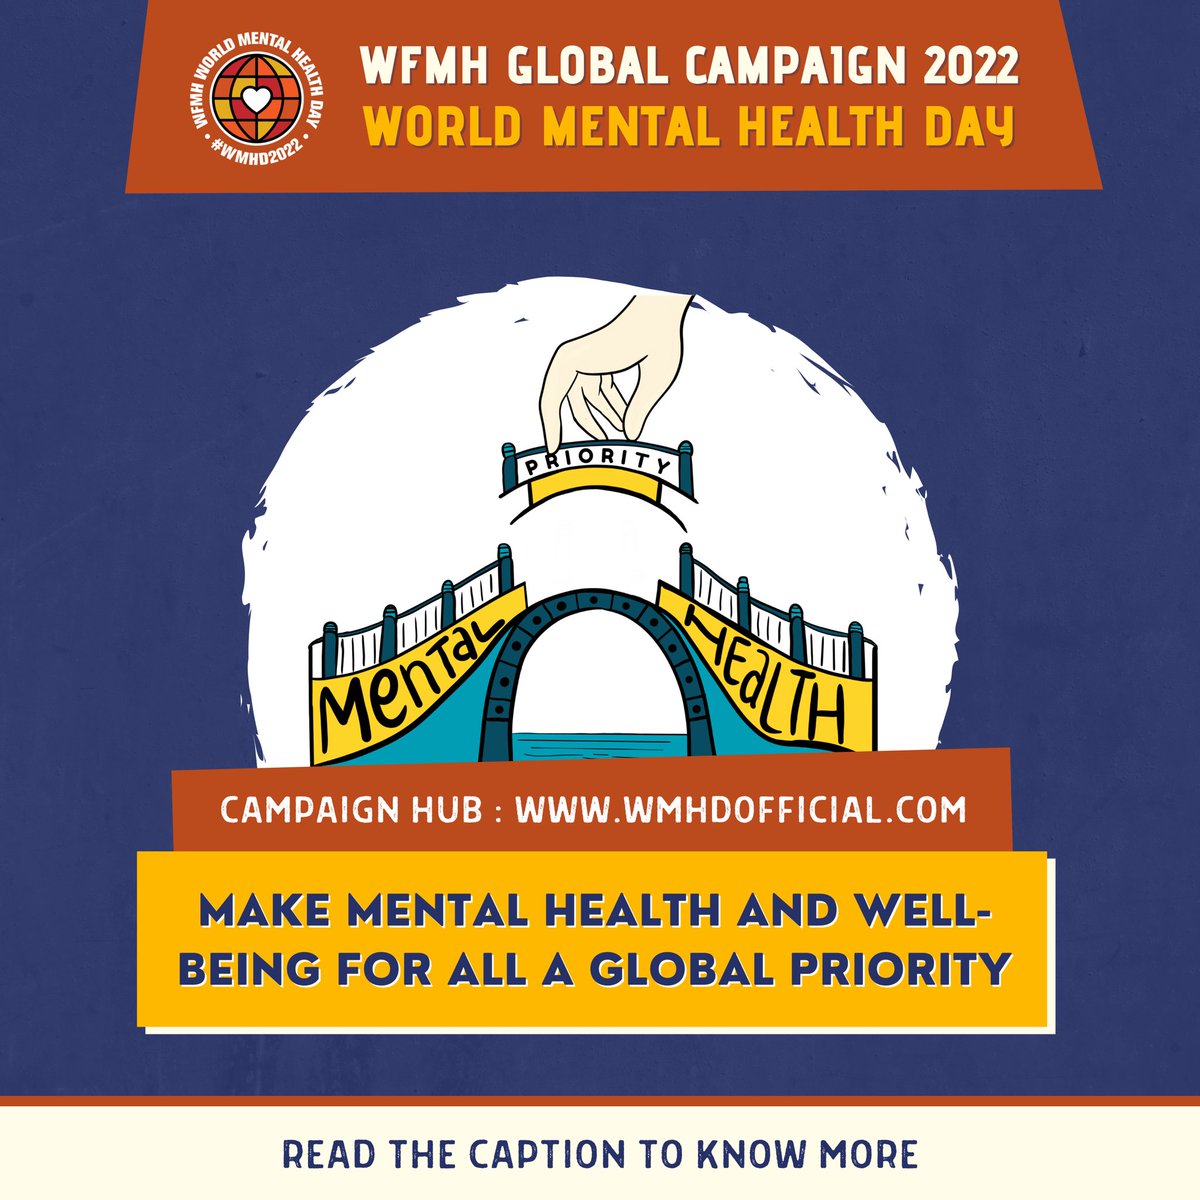 As individuals, communities and organisations across the globe commence their initiatives to commemorate the 31st World Mental Health Day, WFMH expresses their sincere gratitude for everyone working towards making mental health a global priority. #WorldMentalHealthDay #WMHD2022